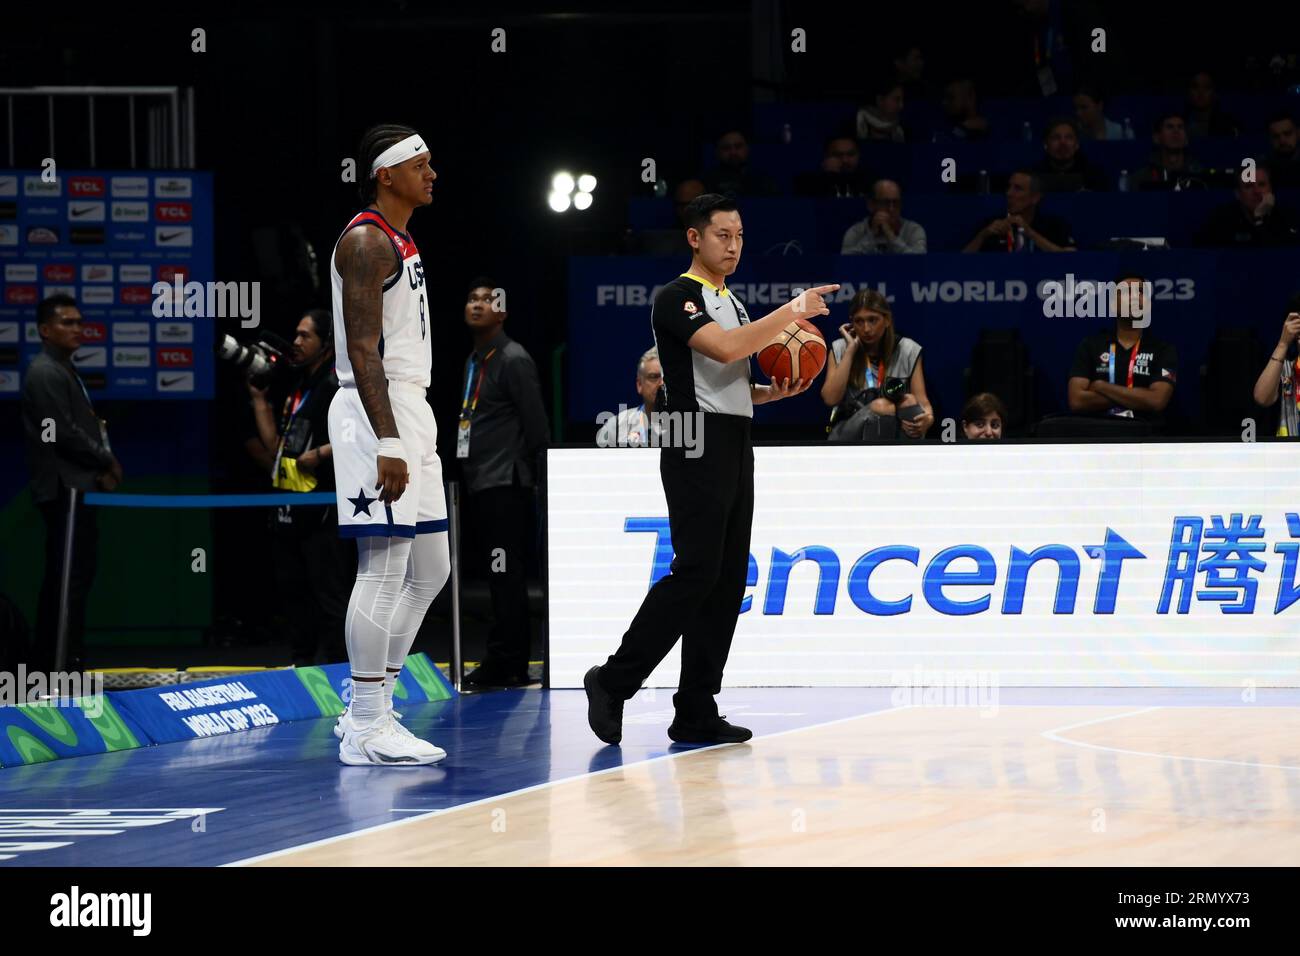 Basketball Referee in Action Editorial Stock Photo - Image of arena, fiba:  39494348